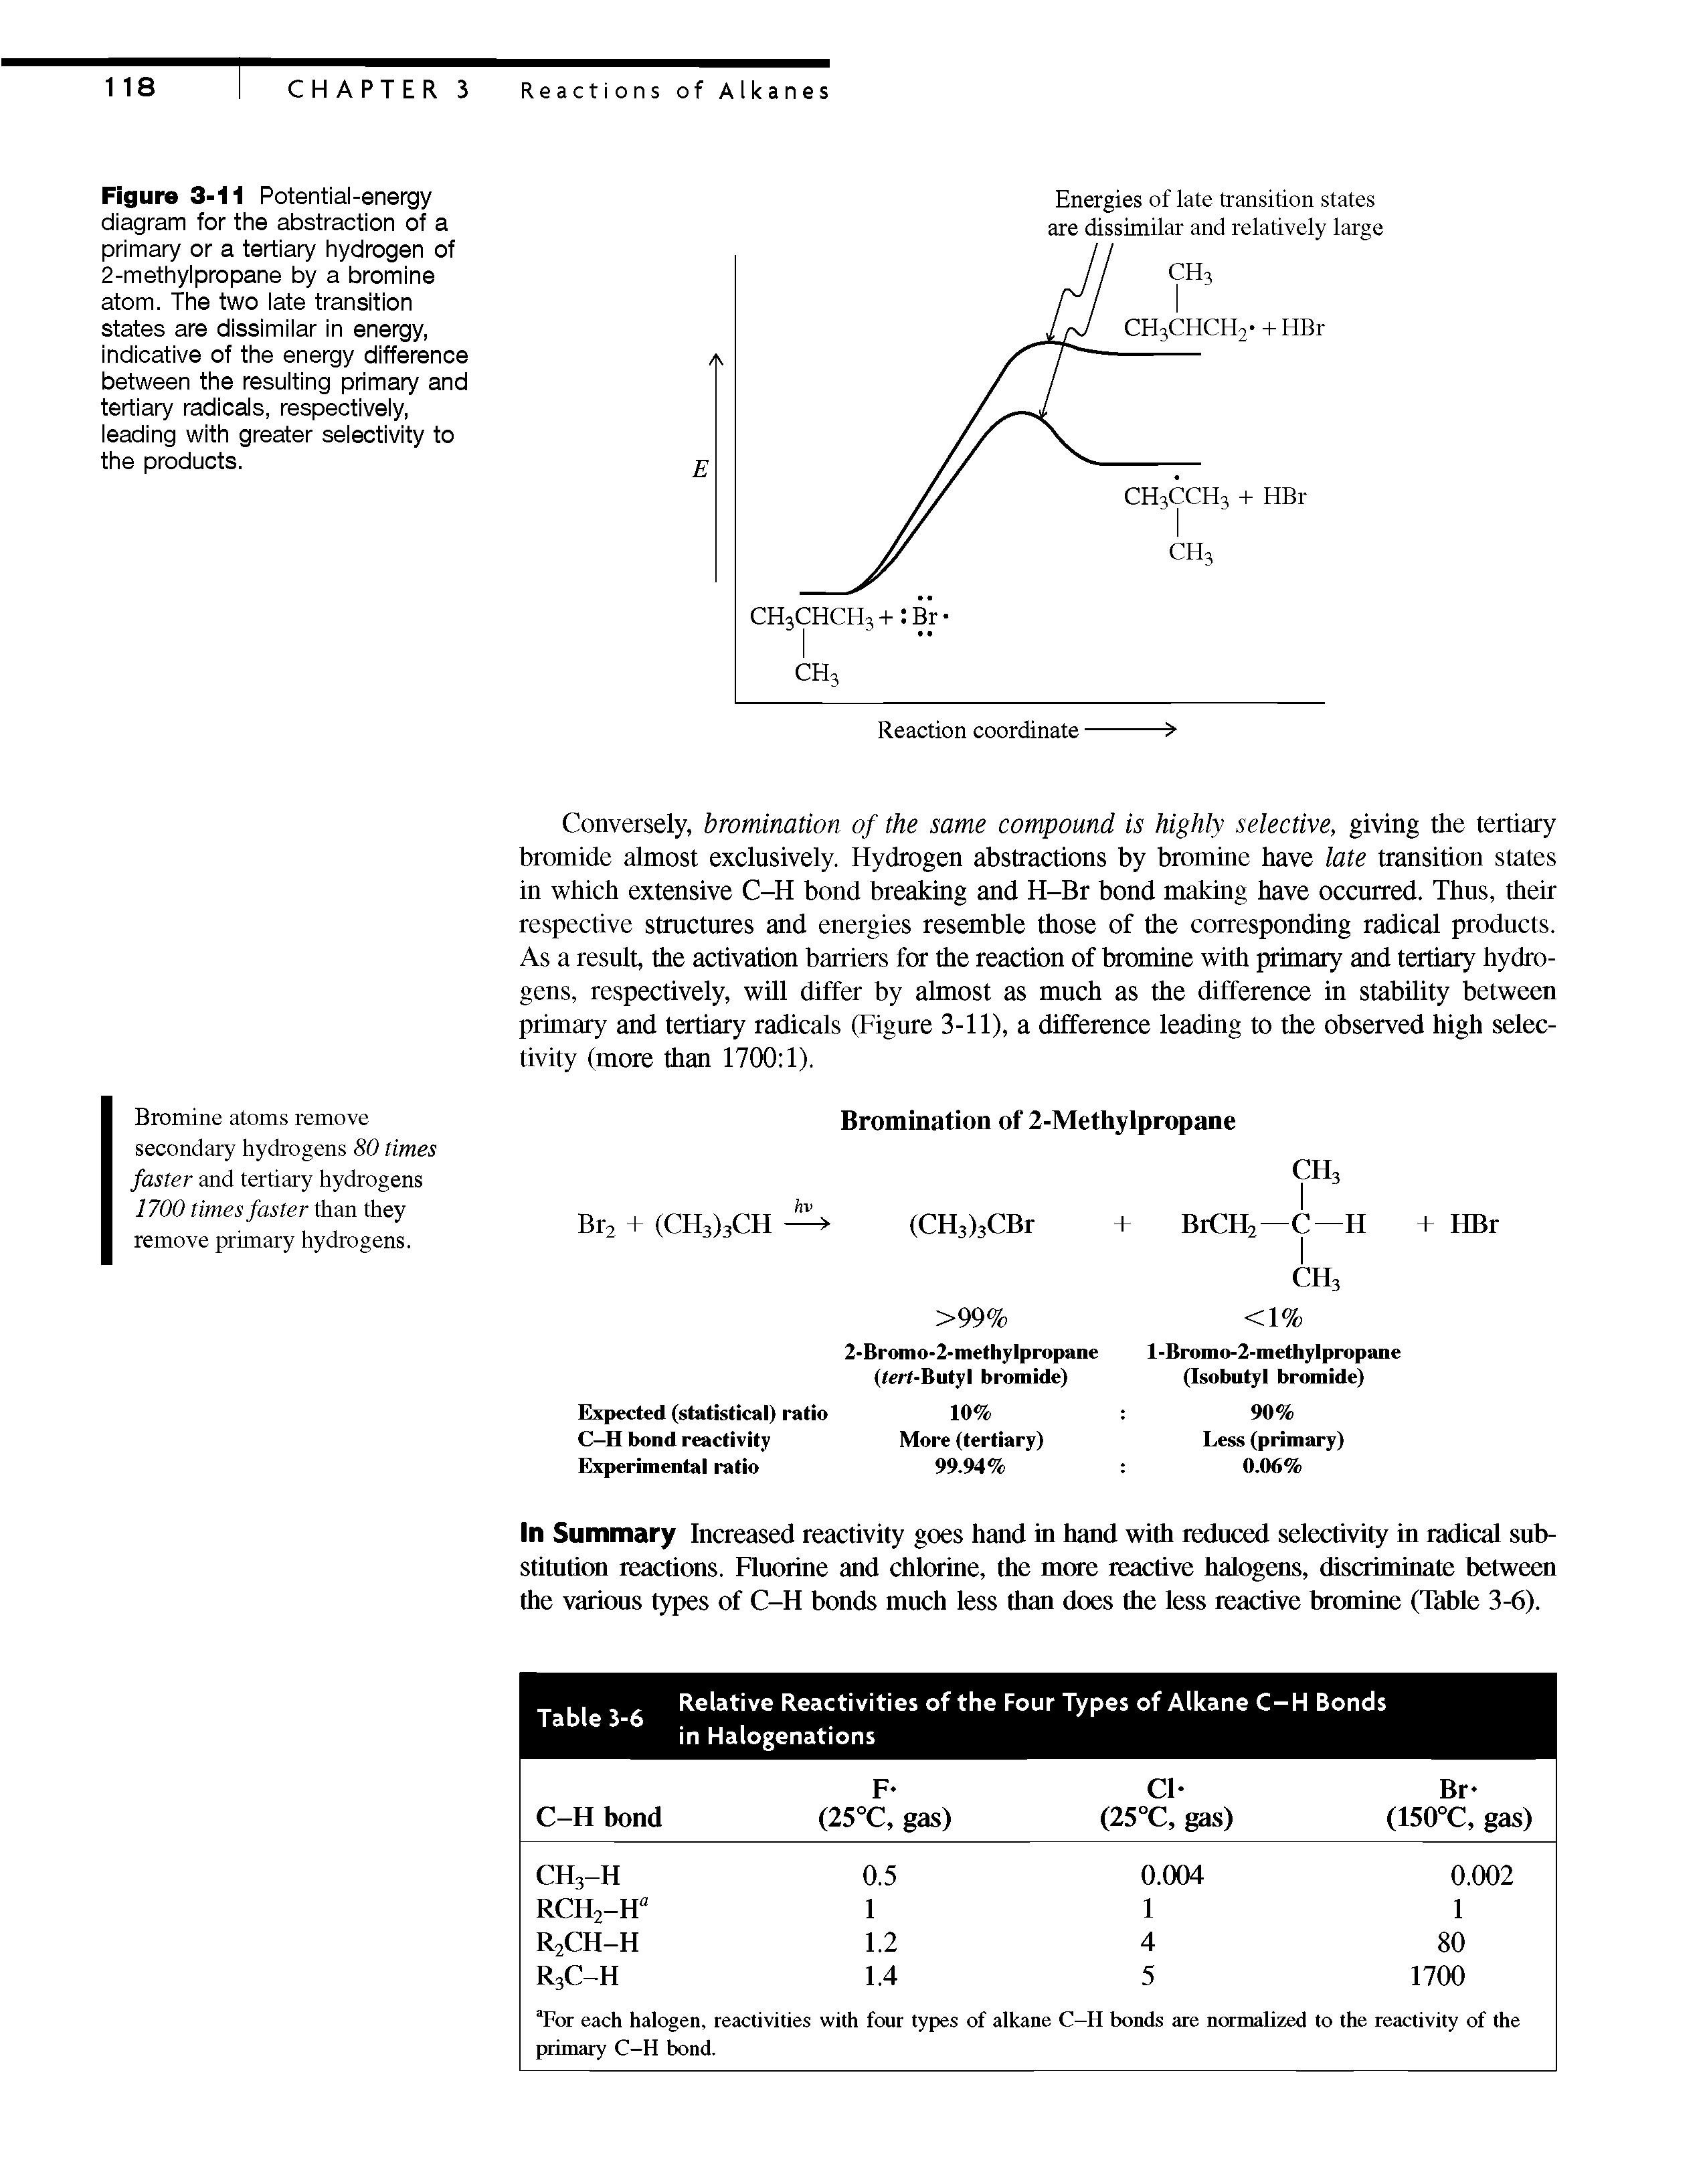 Figure 3-11 Potential-energy diagram for the abstraction of a primary or a tertiary hydrogen of 2-methylpropane by a bromine atom. The two iate transition states are dissimilar in energy, indicative of the energy difference between the resulting primary and tertiary radicals, respectively, leading with greater selectivity to the products.